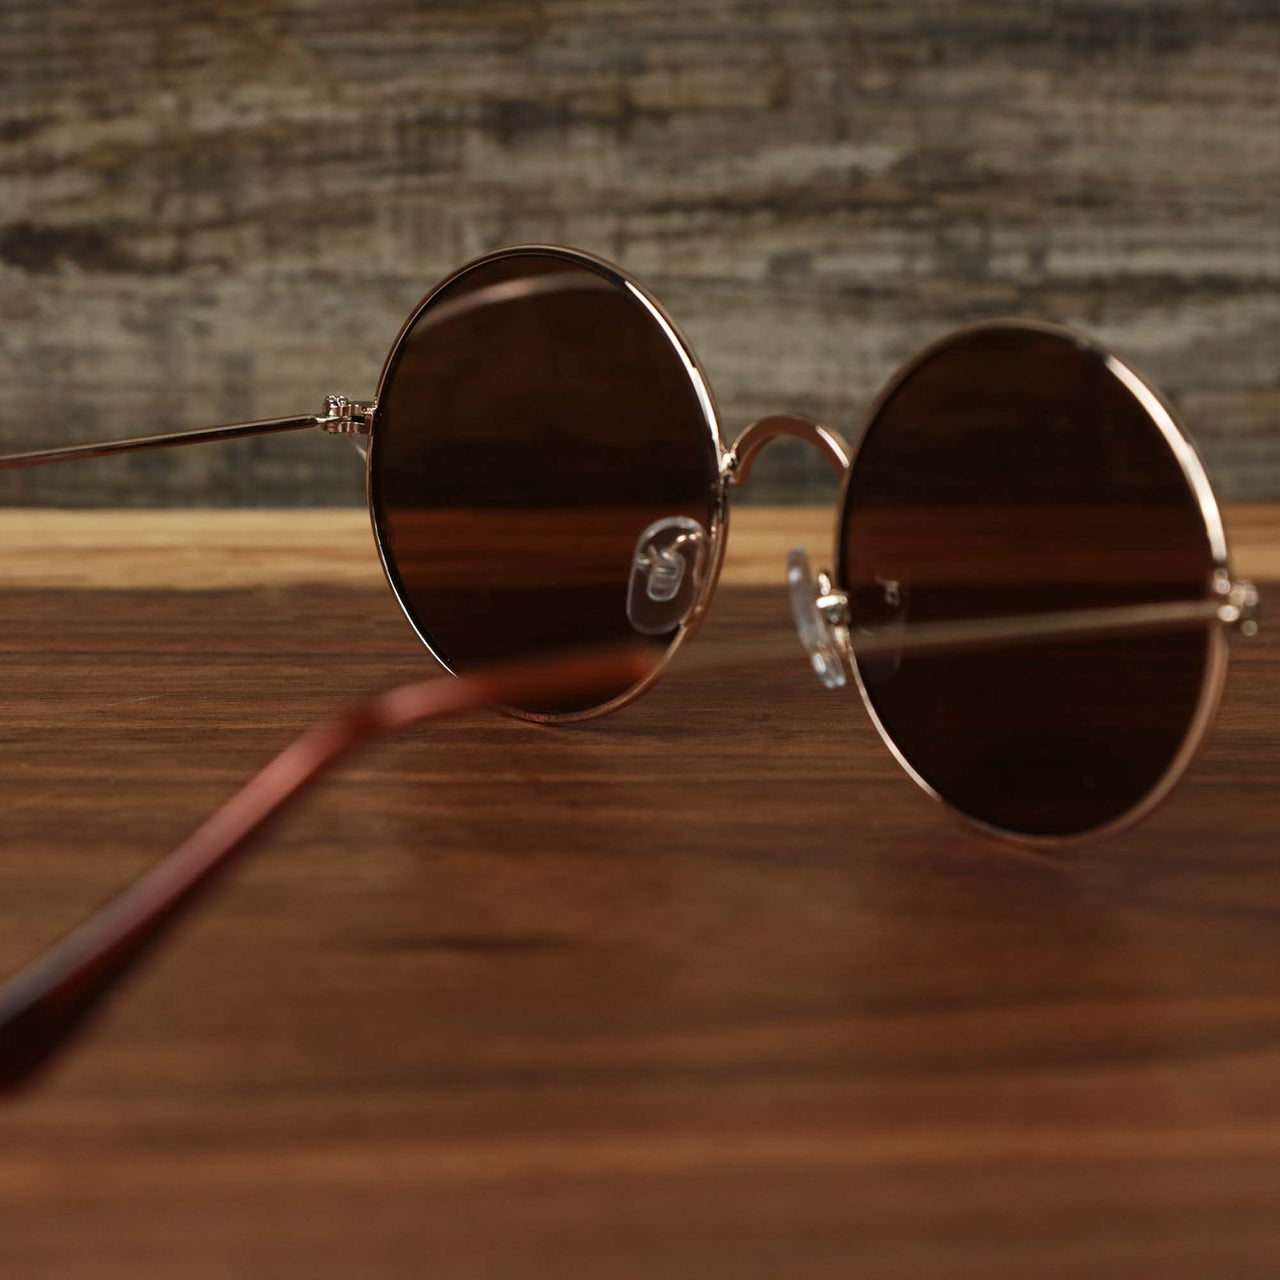 The inside of the Youth Round Frame Pink Lens Sunglasses with Rose Gold Frame